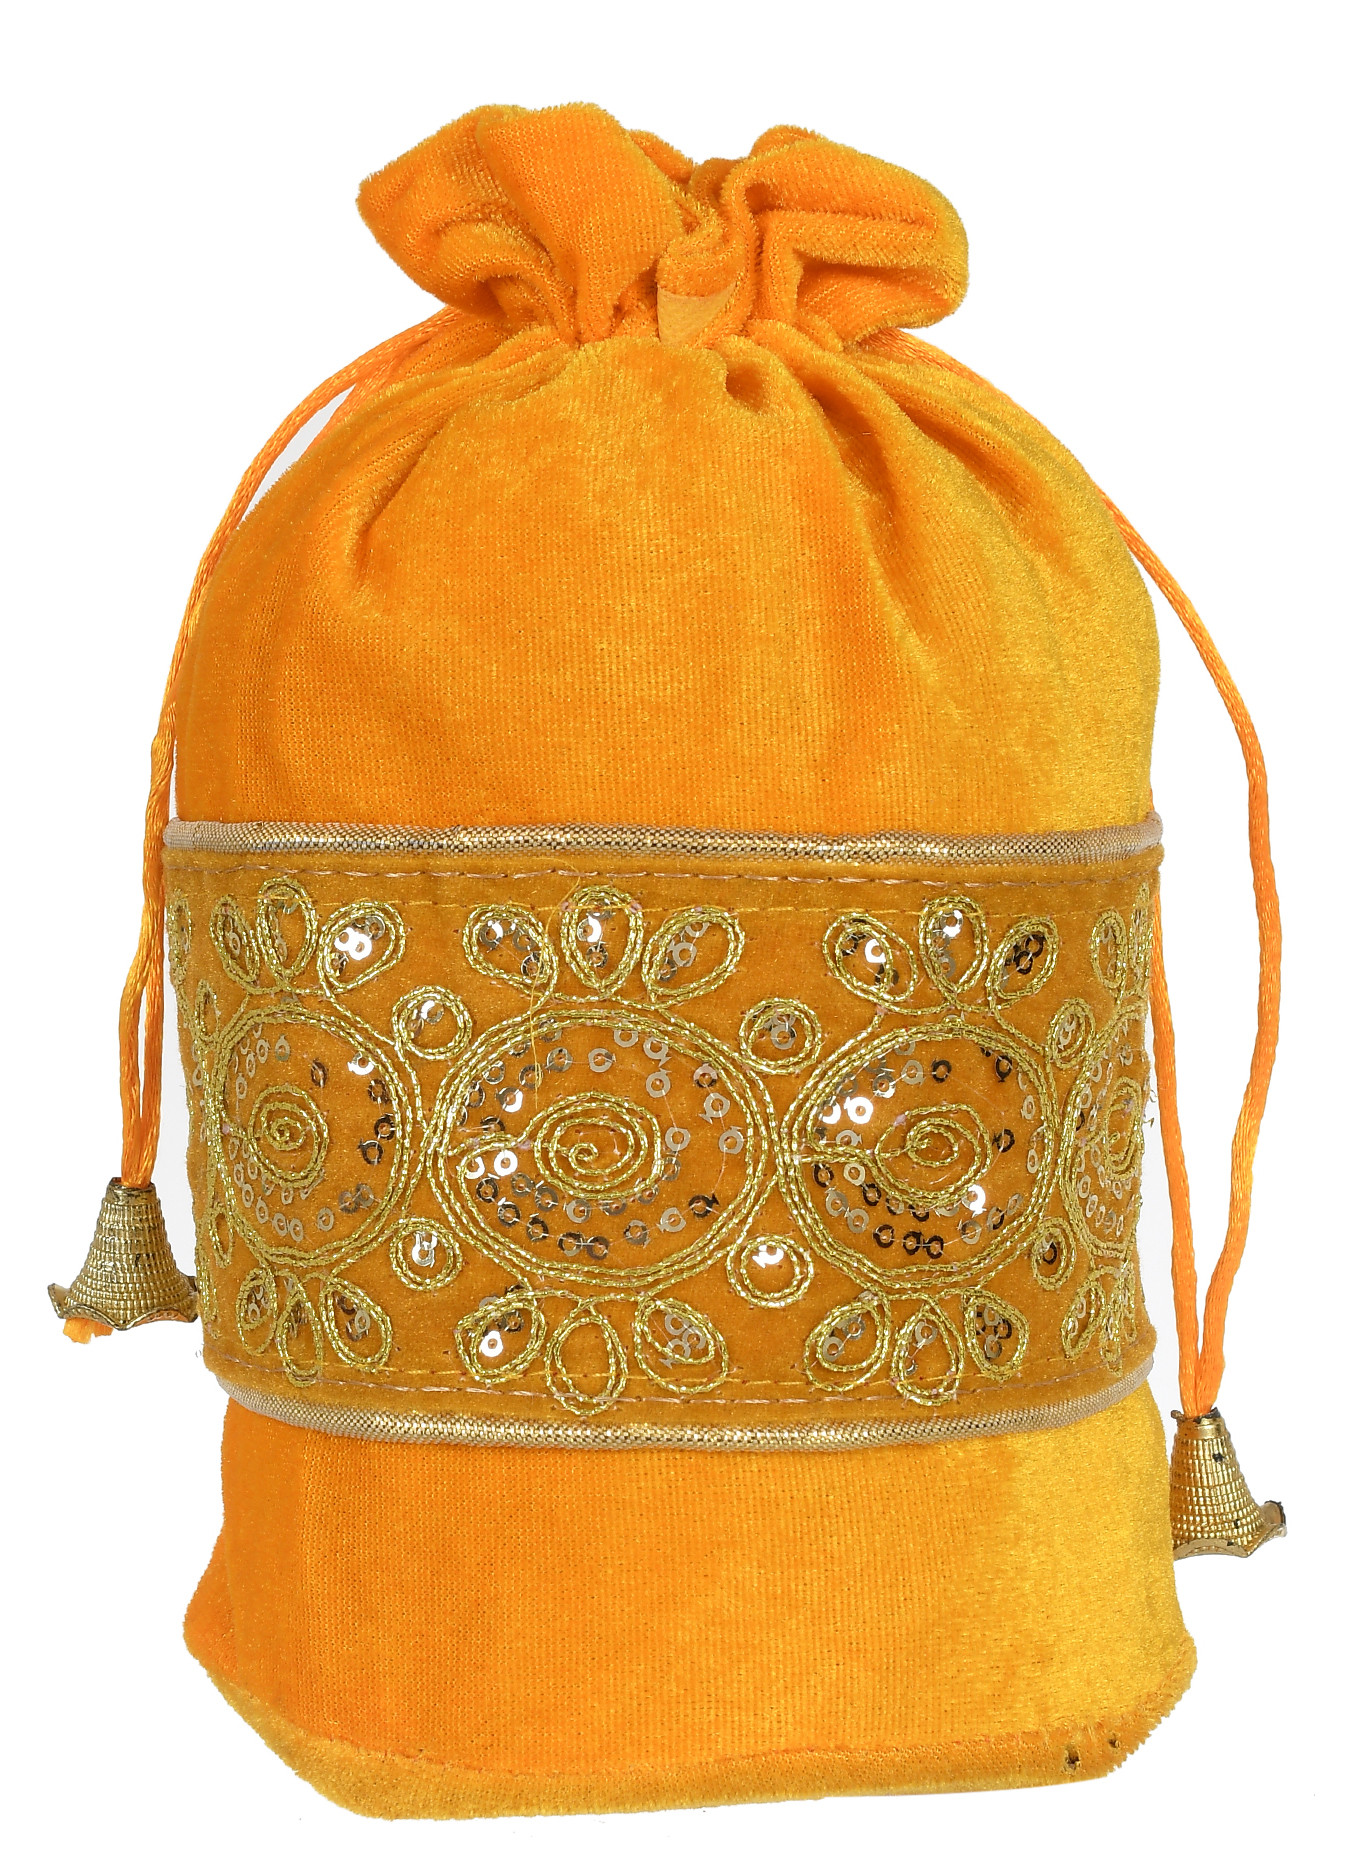 Kuber Industries Embroidered Design Drawstring Potli Bag Party Wedding Favor Gift Jewelry Bags-(Red & Yellow & Orange)